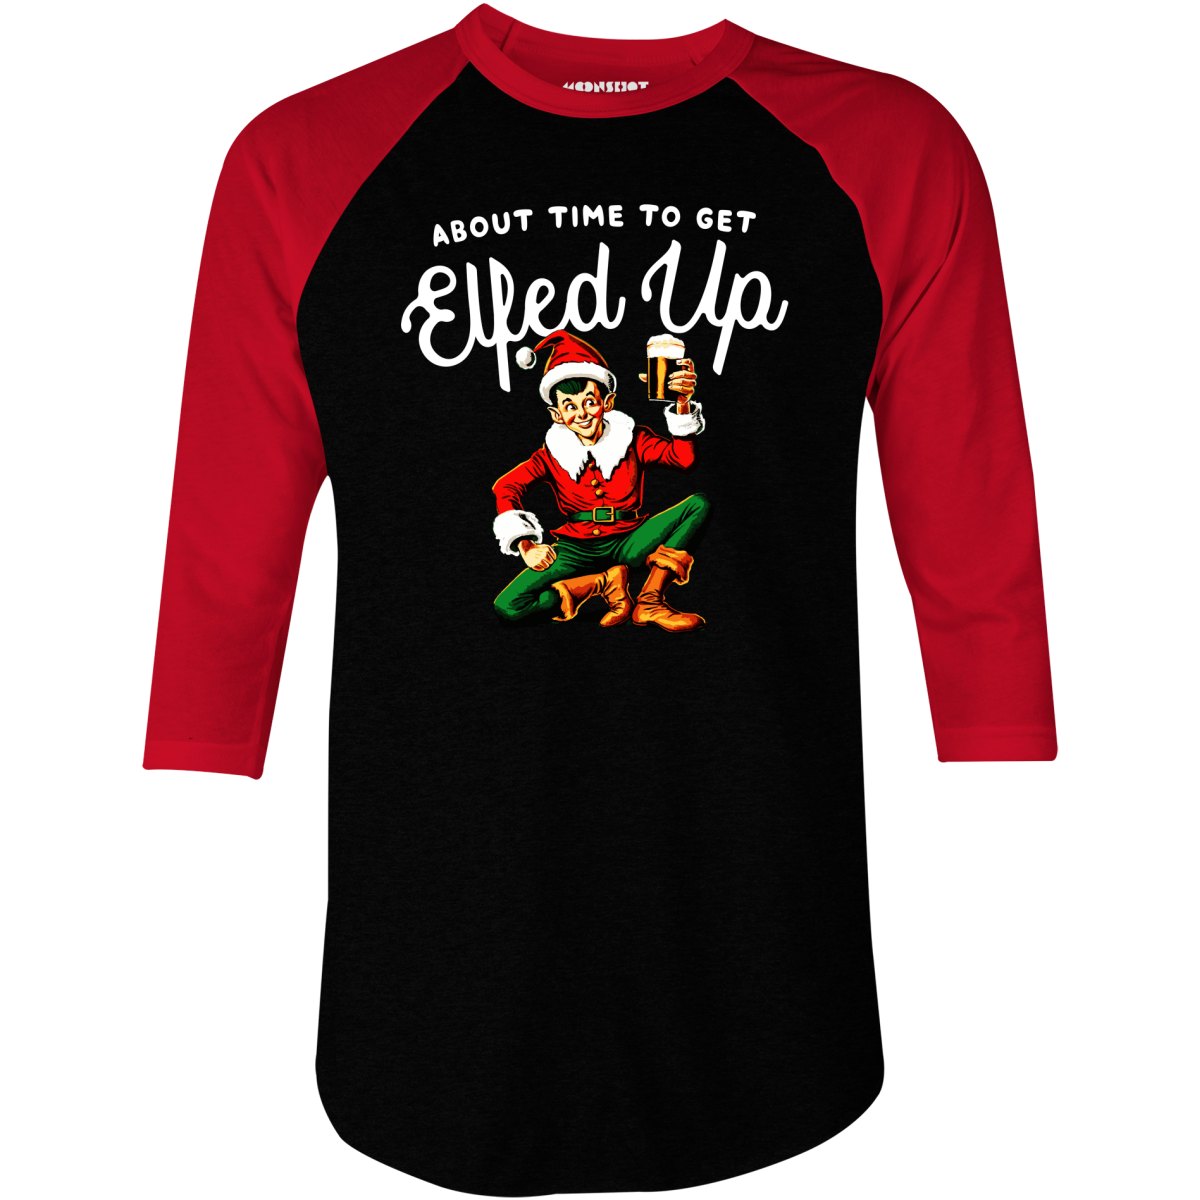 About Time to Get Elfed Up - 3/4 Sleeve Raglan T-Shirt